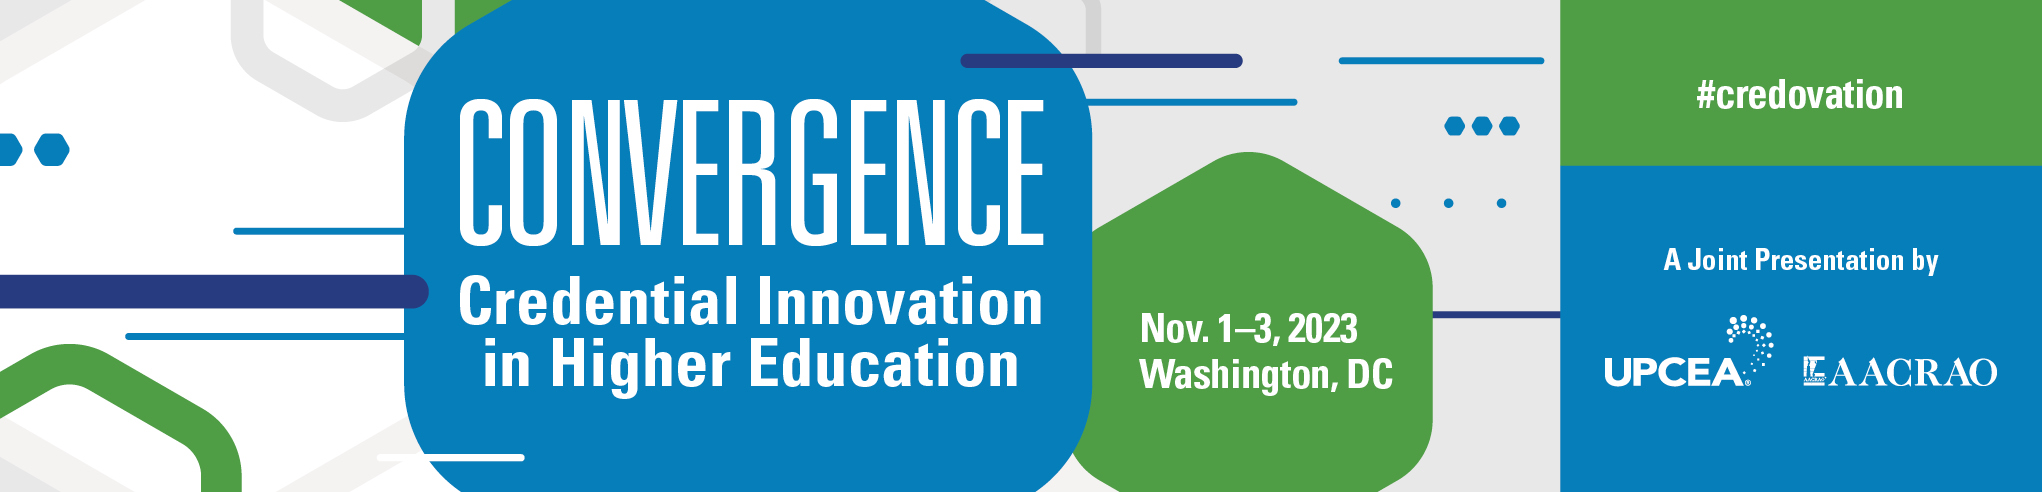 2023 Convergence: Credential Innovation in Higher Education | November 1-3, 2023 | Capital Hilton | Washington, DC | UPCEA + AACRAO